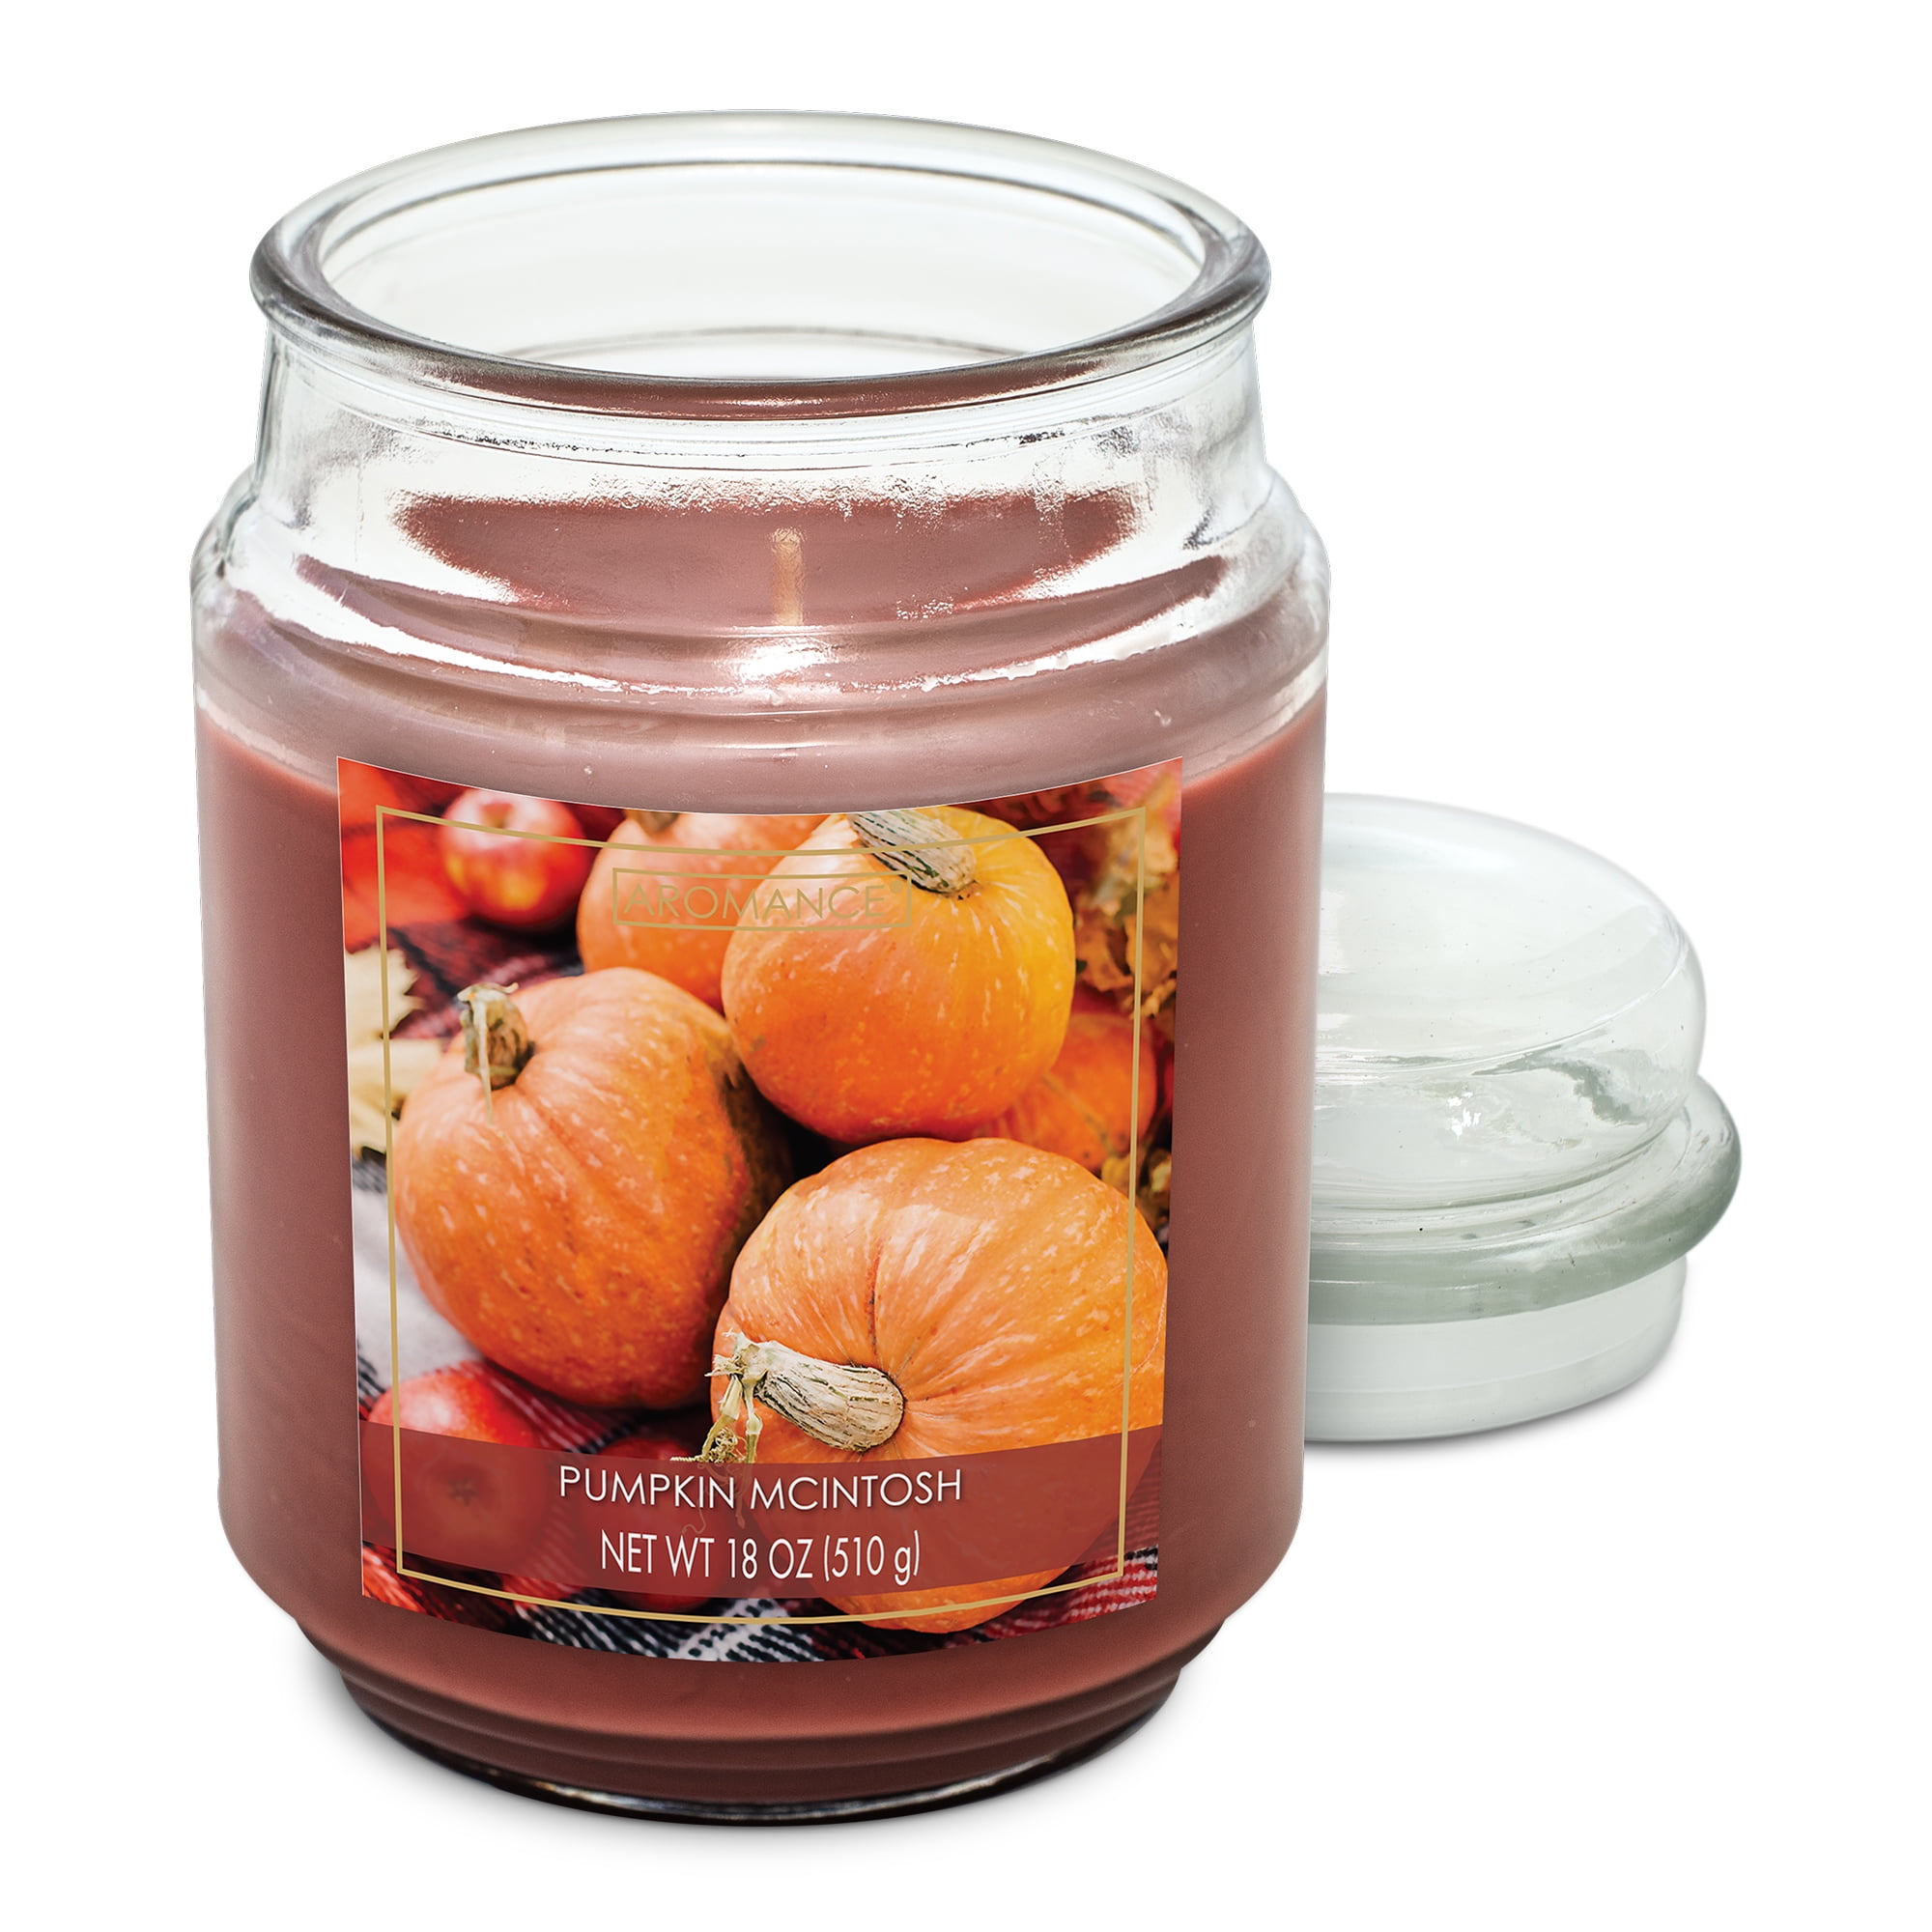 Pumpkin Spice Scented Candle - 9oz Glass Jar Soy Candle